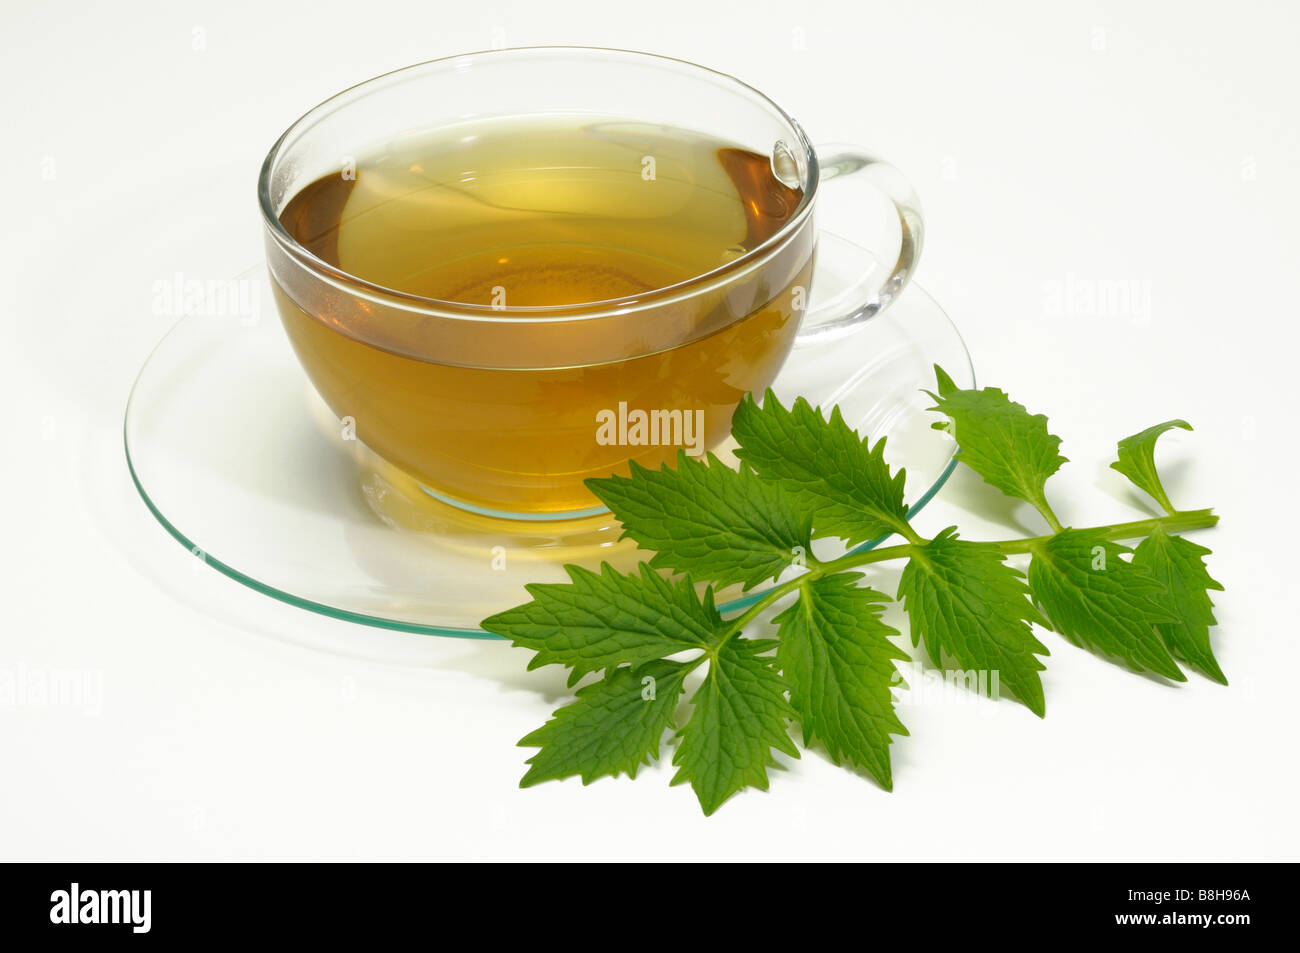 Common Valerian (Valeriana officinalis). A cup of tea with leaves, studio picture Stock Photo